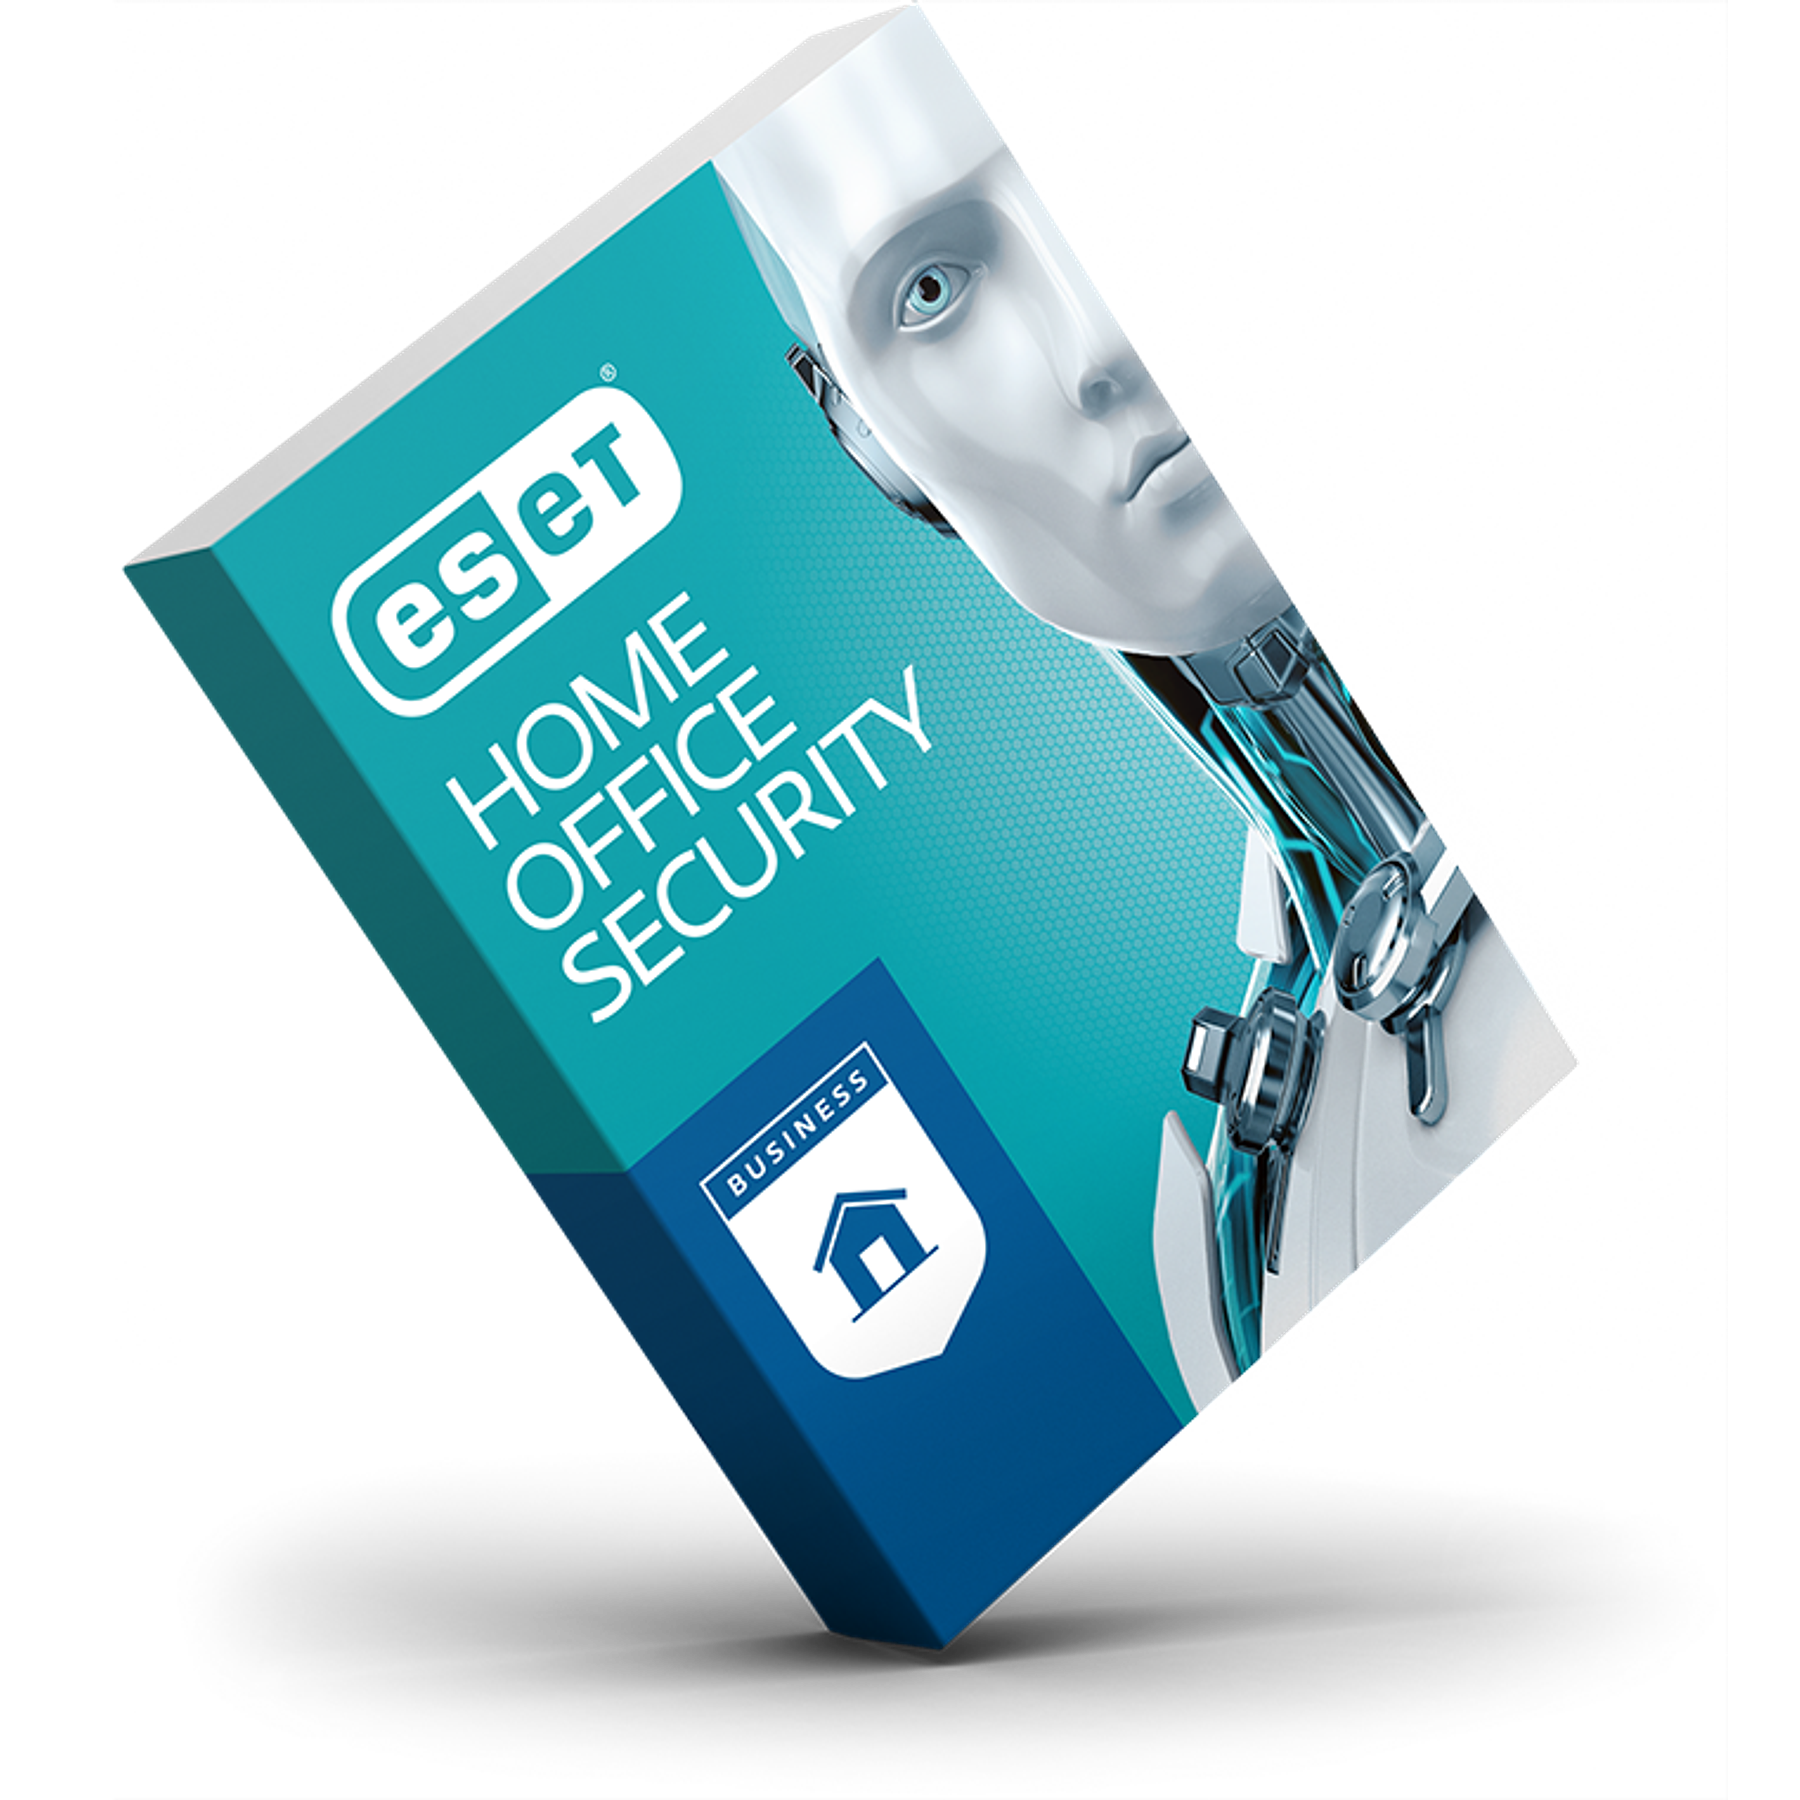 Eset Home Office Security 15 Equipos